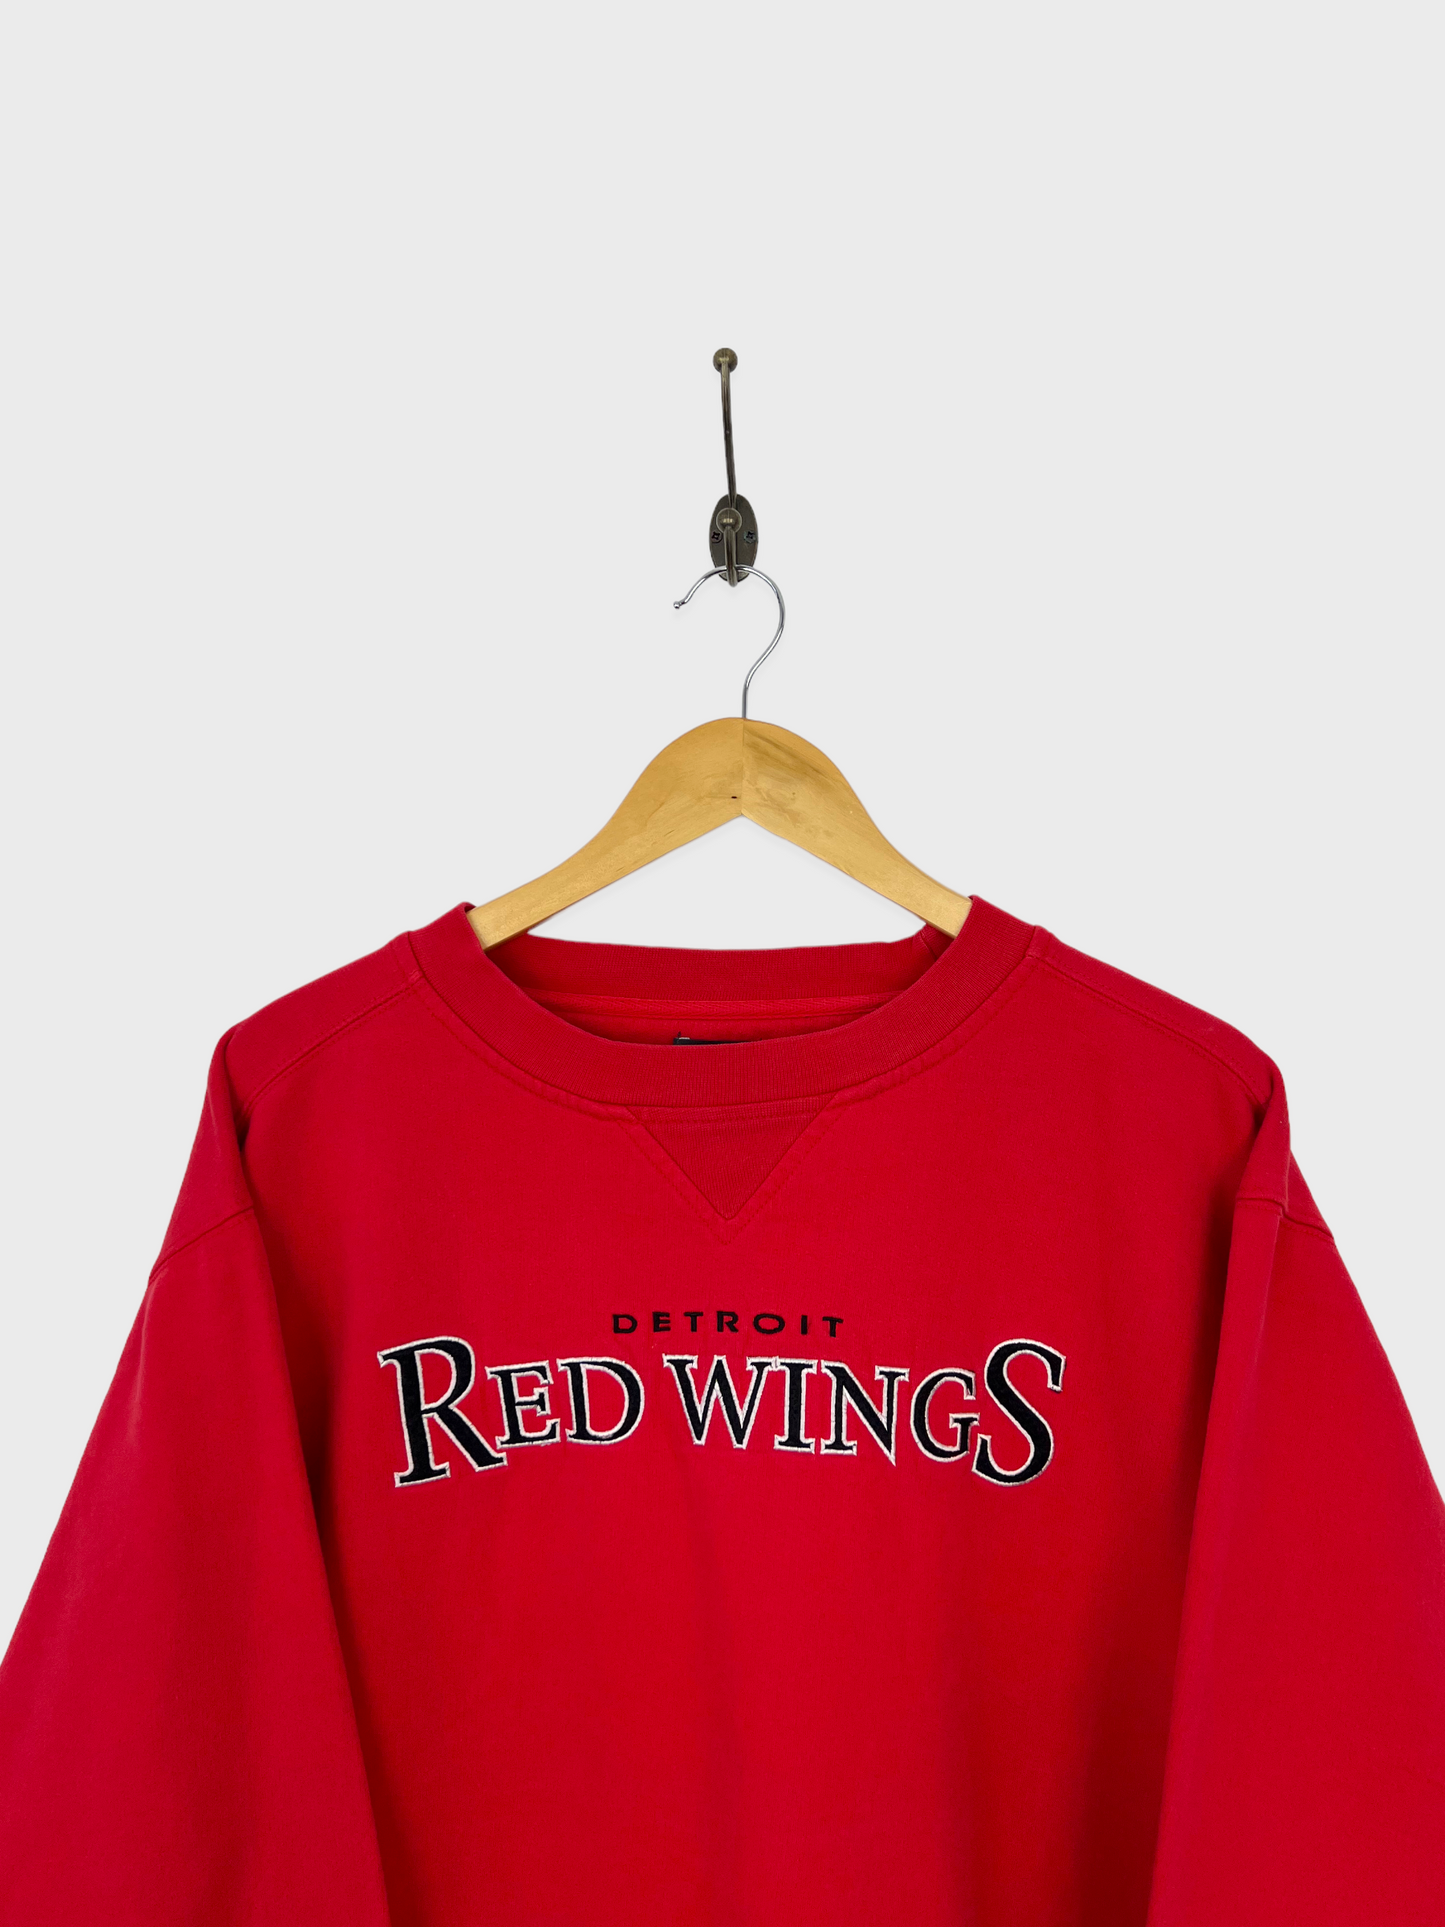 90's Detroit Red Wings NHL Embroidered Vintage Sweatshirt Size M-L